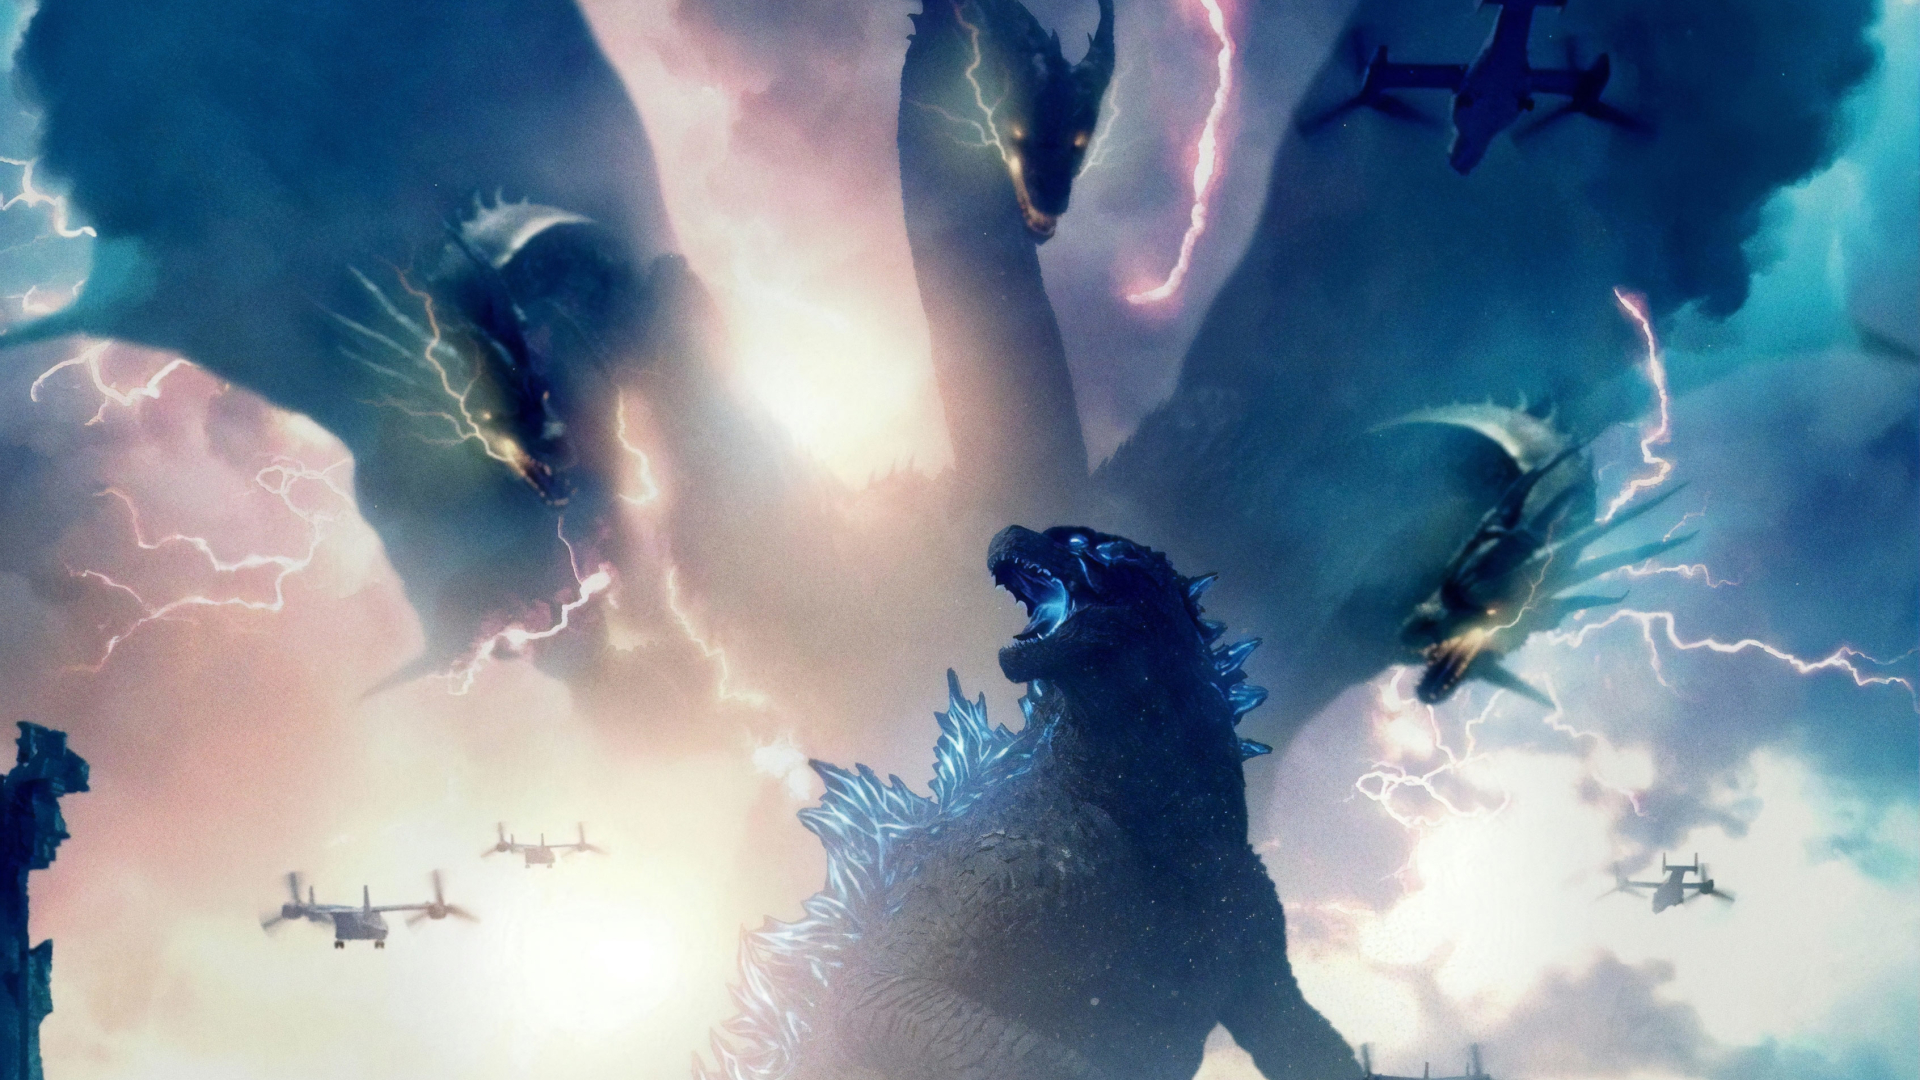 godzilla 2019 movie online free without sign up and no downloads